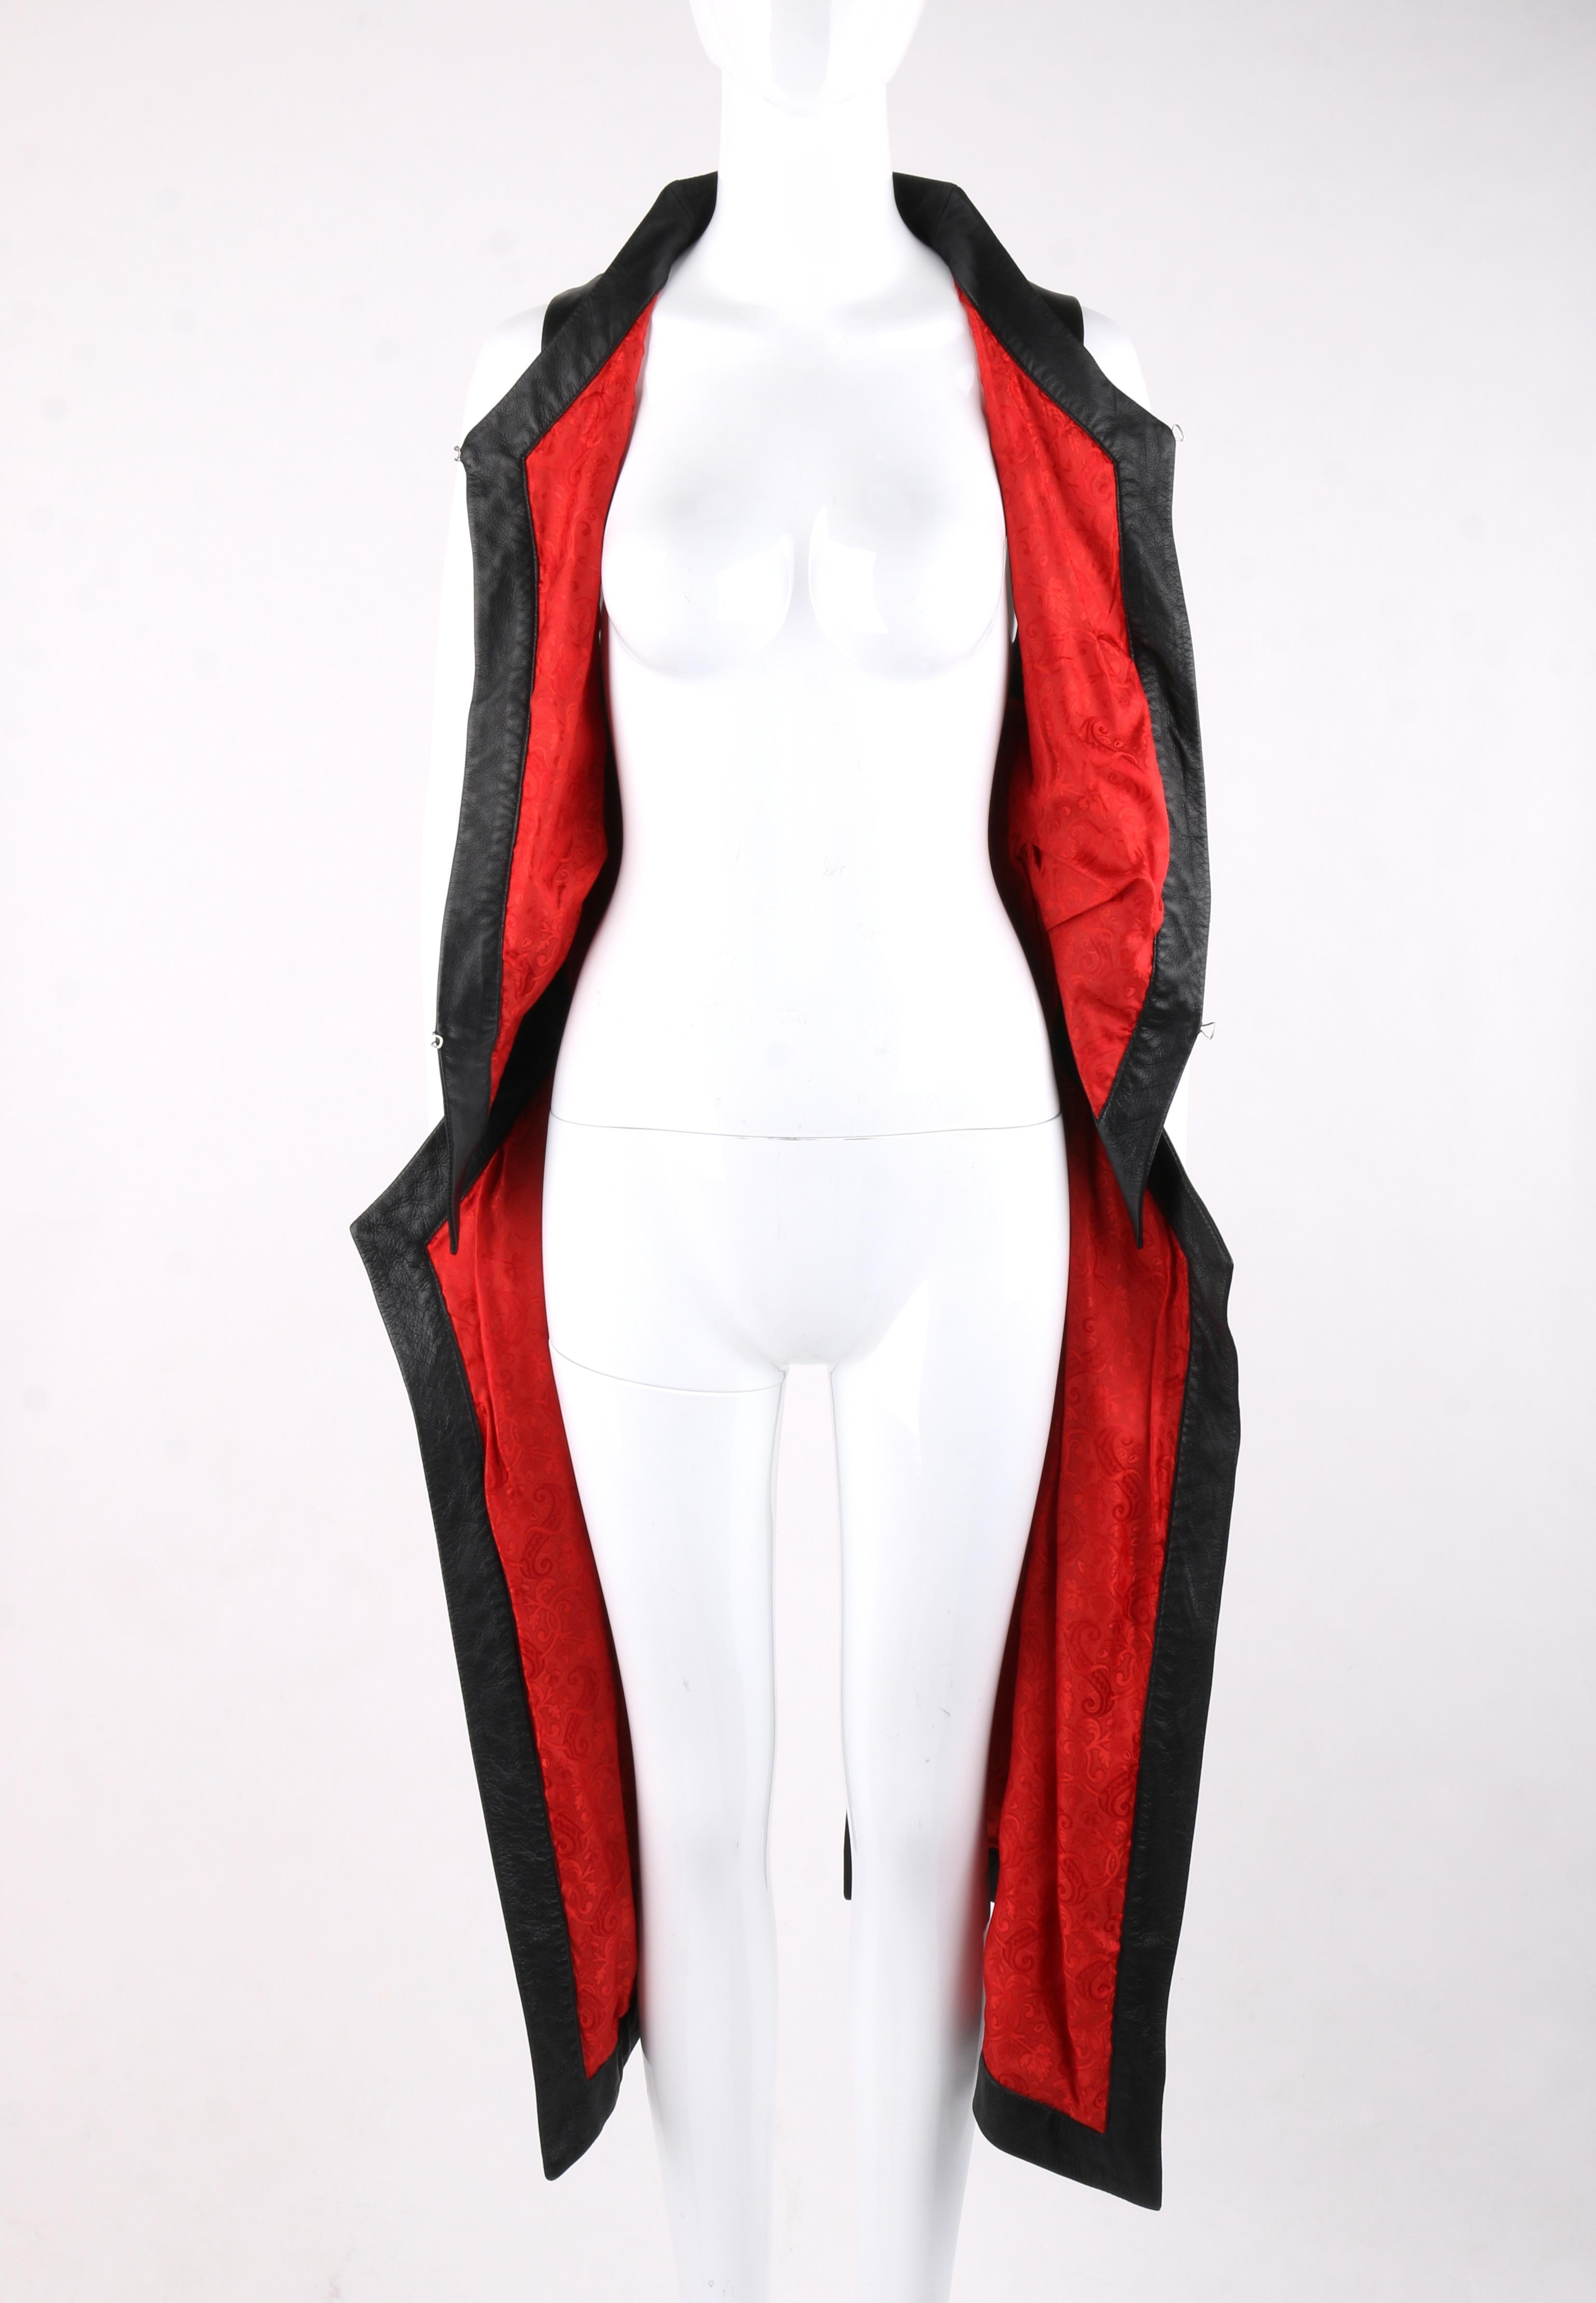 ALEXANDER McQUEEN S/S 2000 “Eye” Runway Red Black Leather Cut Out Vest Jacket In Good Condition For Sale In Thiensville, WI